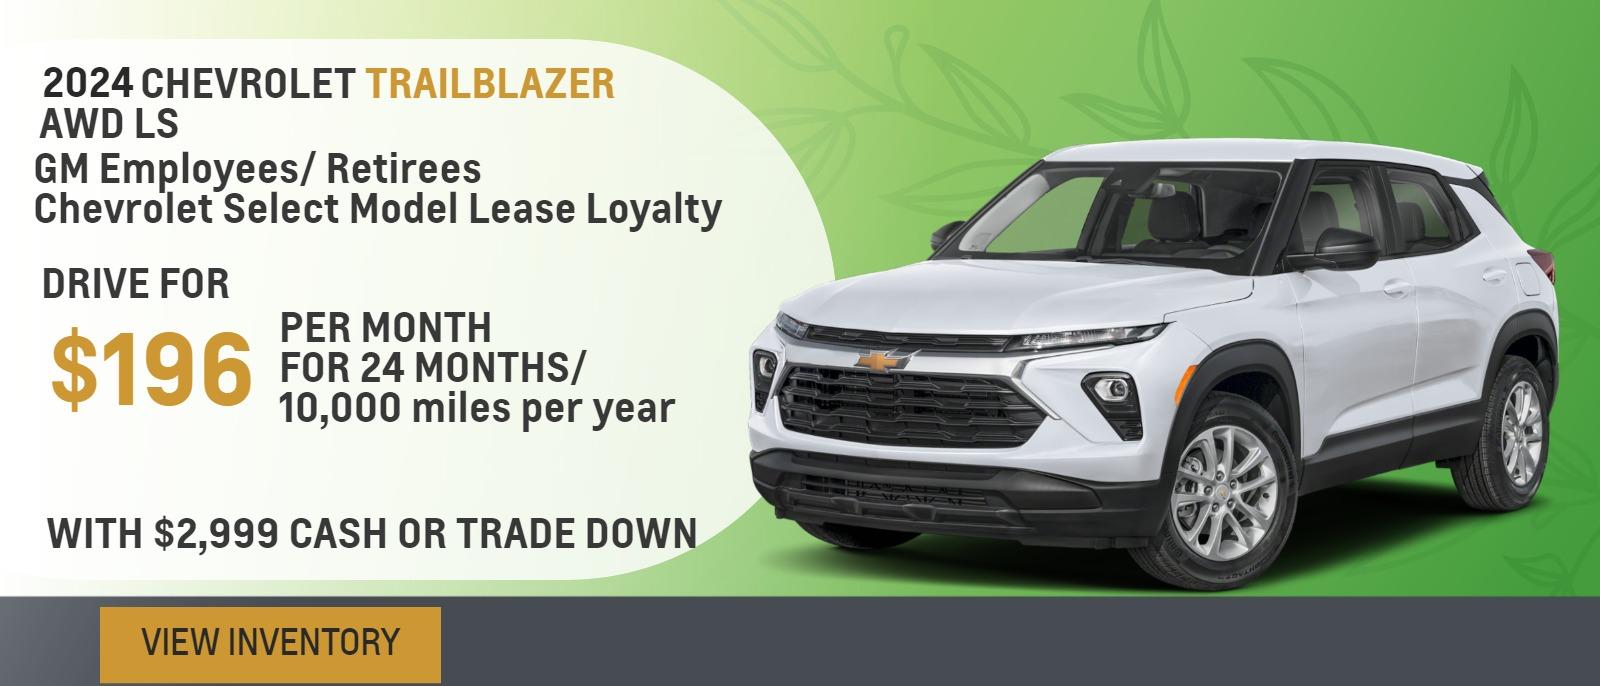 2024 Trailblazer AWD LS
GM Employees/ Retirees
Chevrolet Select Model Lease Loyalty

Drive for $196 per month
24 Months / 10,000 miles per year
With $2,999 cash or trade down